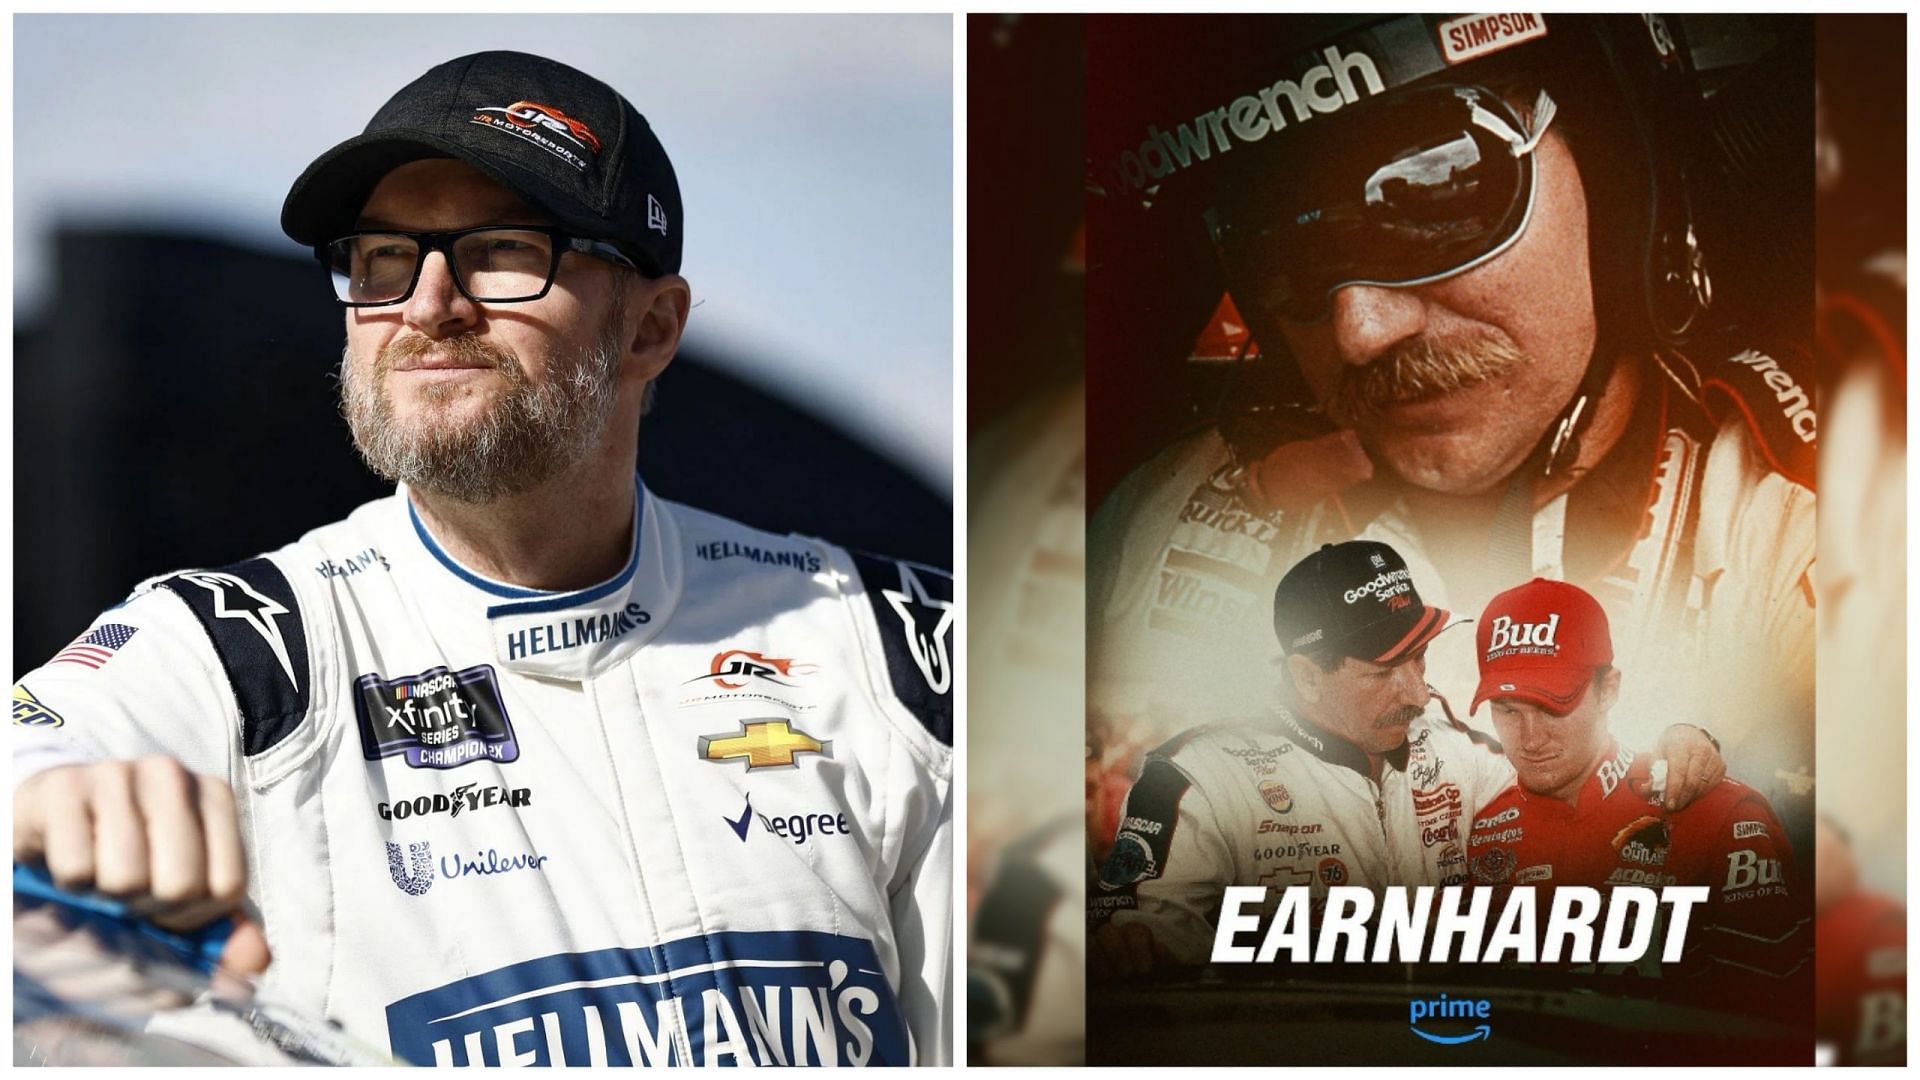 Dale Earnhardt Jr talks about the significance of the Earnhardt documentary